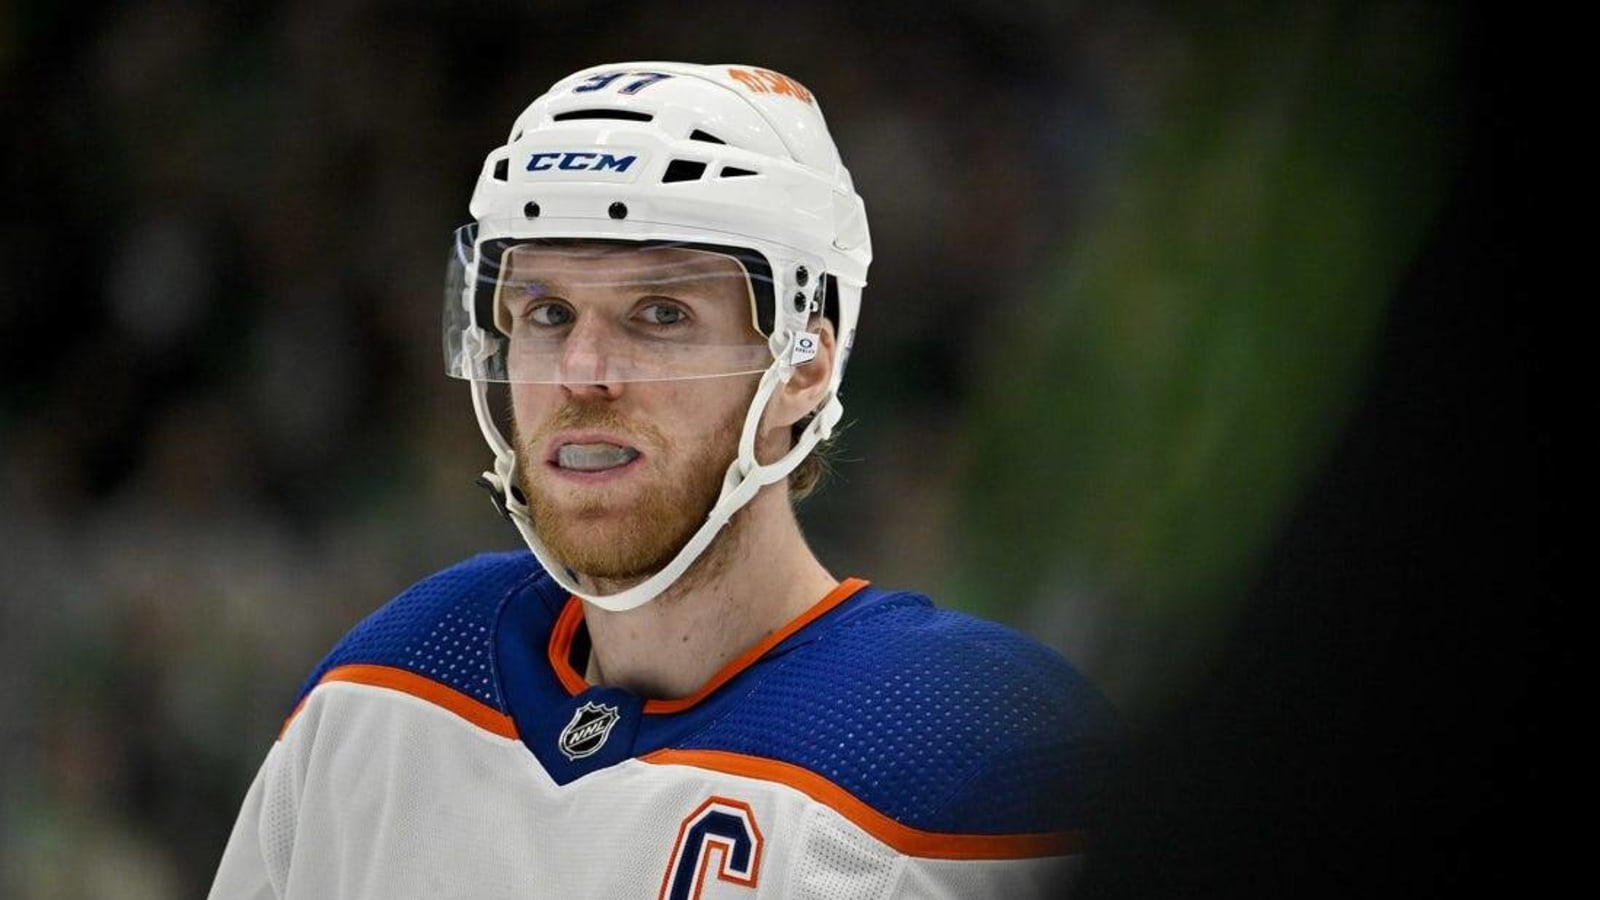 Connor McDavid, Oilers aim to get back on track vs. Avalanche